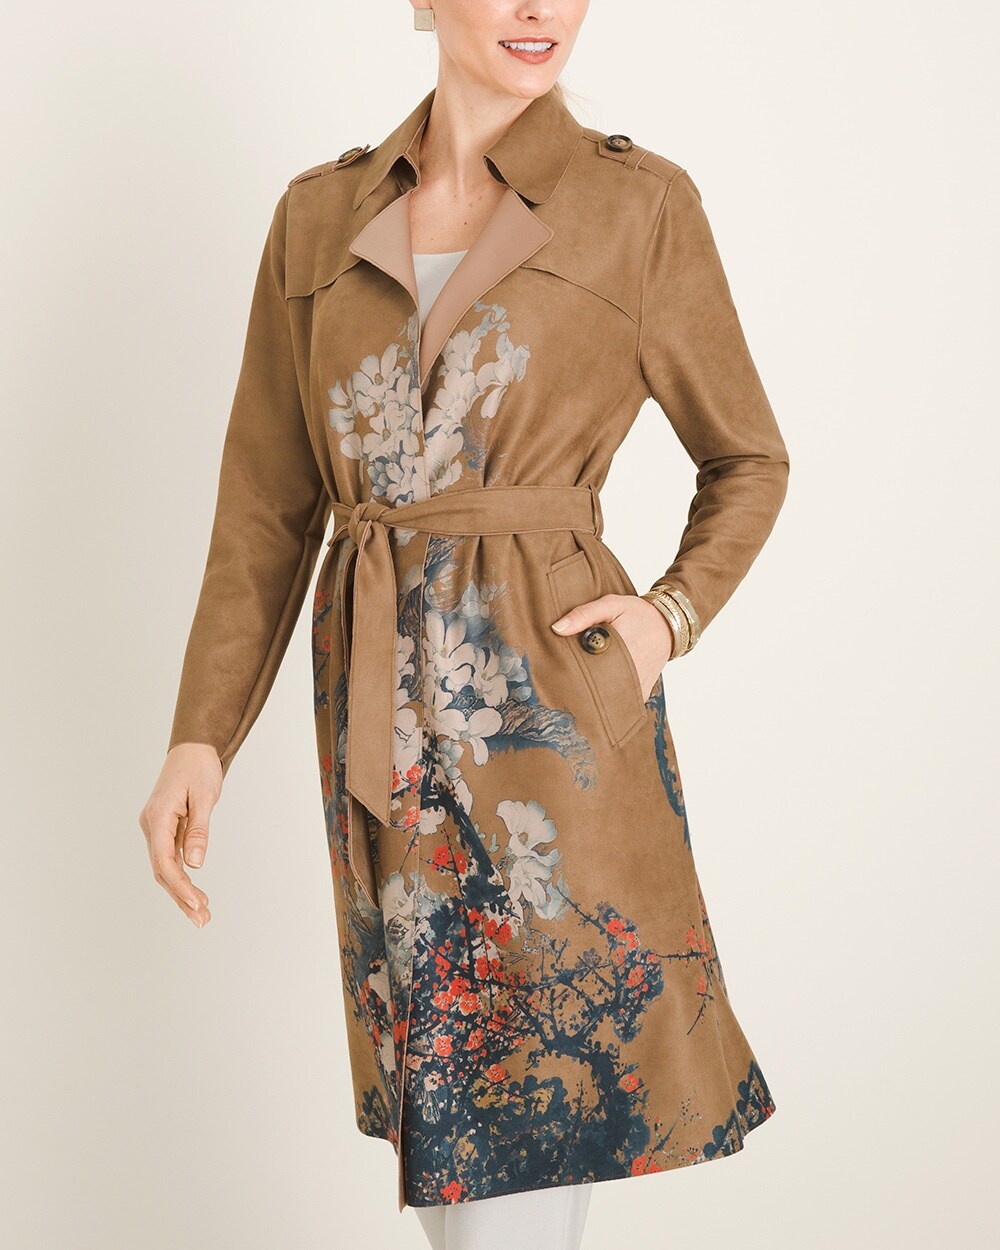 Floral Faux-Suede Trench Coat video preview image, click to start video